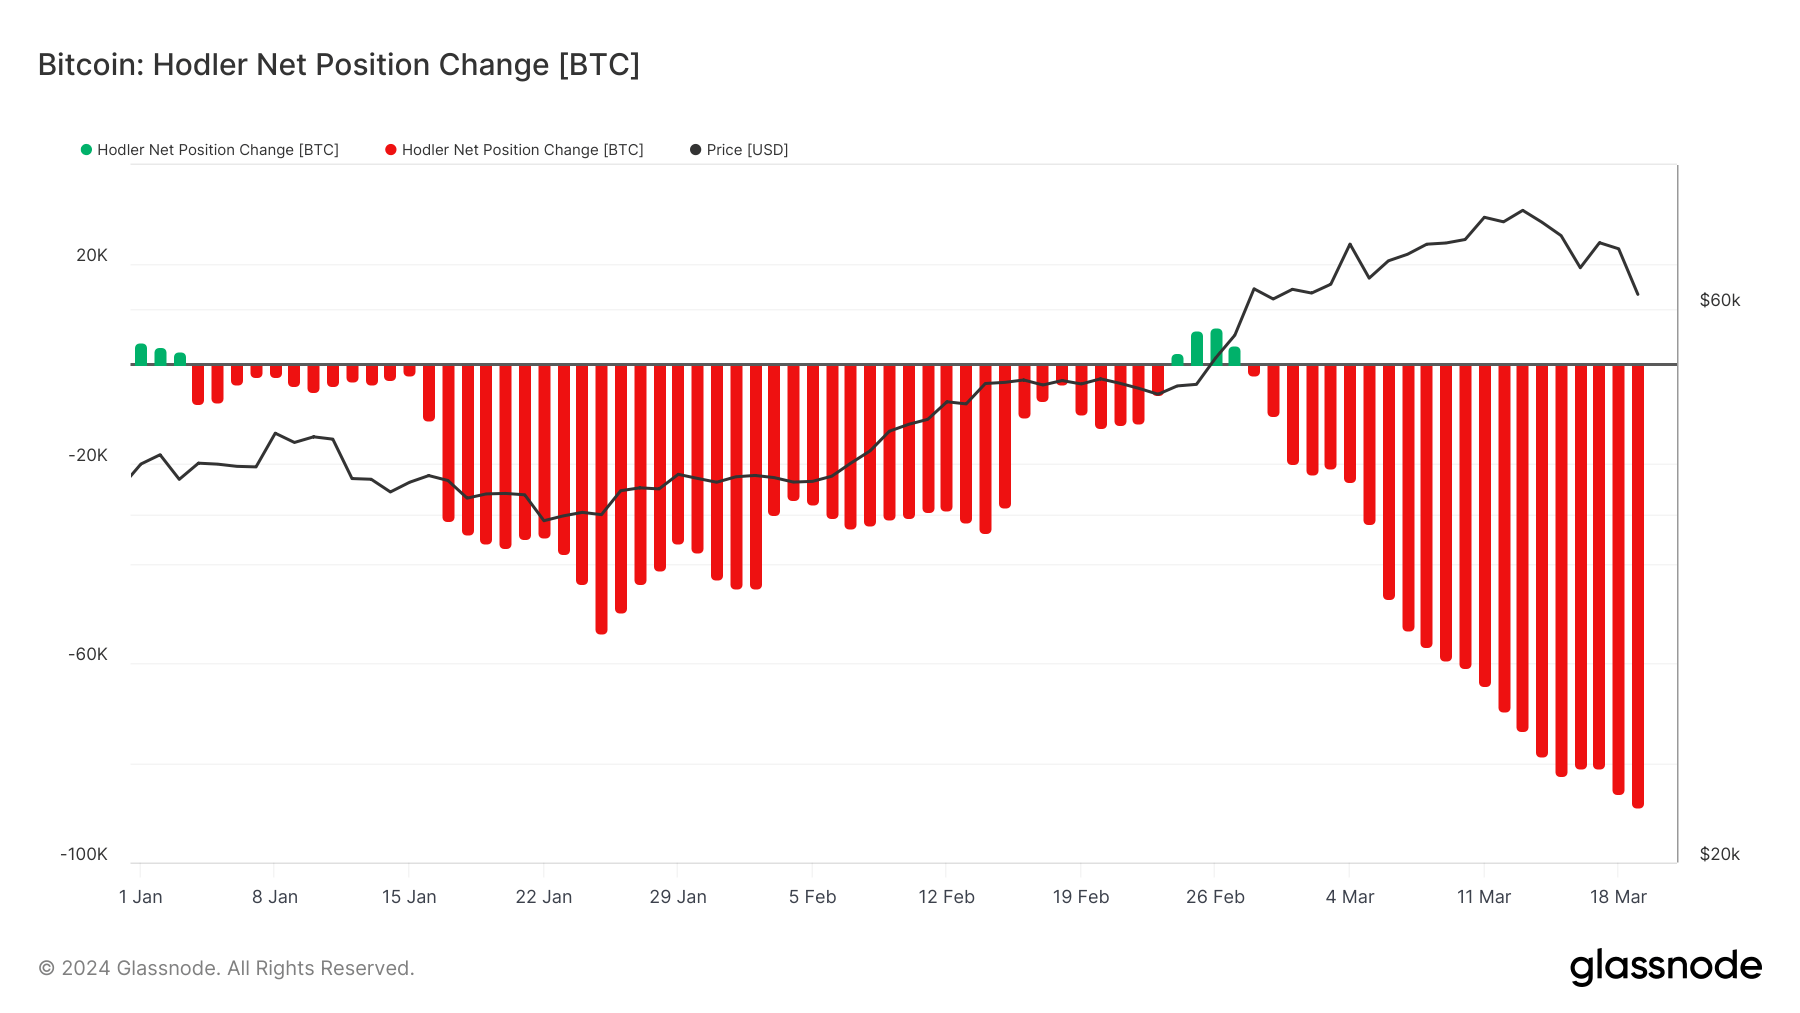 Changes in net position of Bitcoin Hodler balance